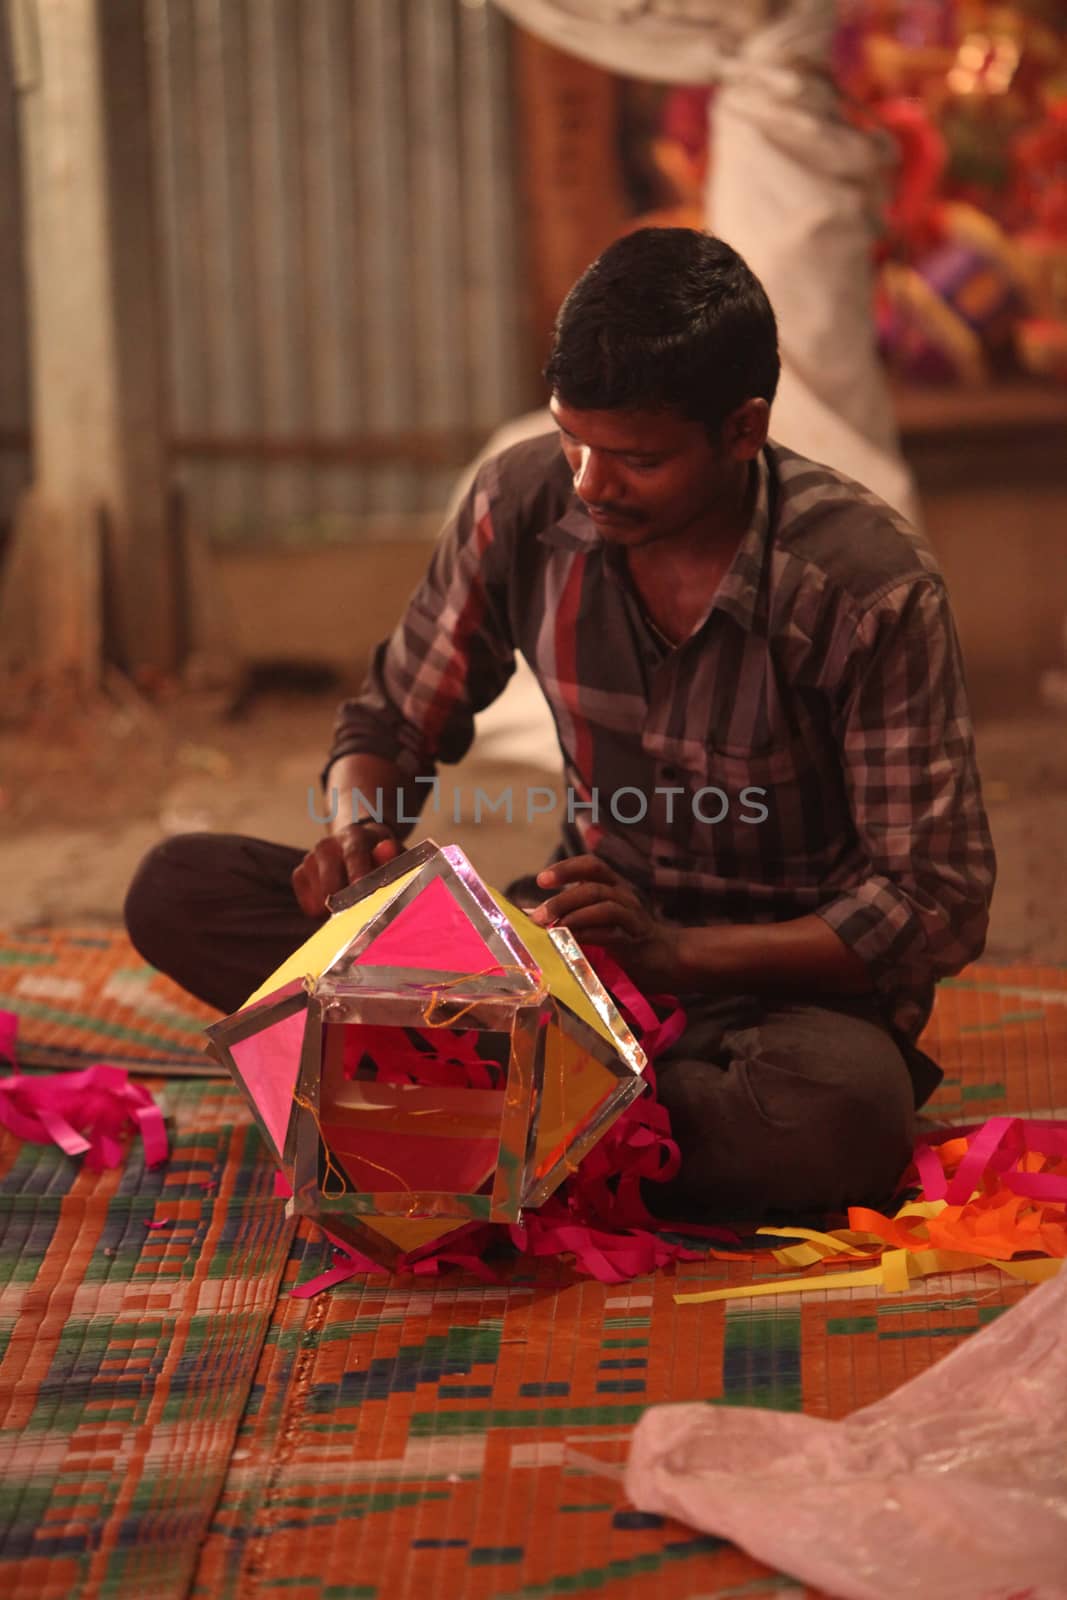 Pune, India - November 7, 2015: A man making a traditional sky lantern in his shop on the occasion of Diwali festival in India